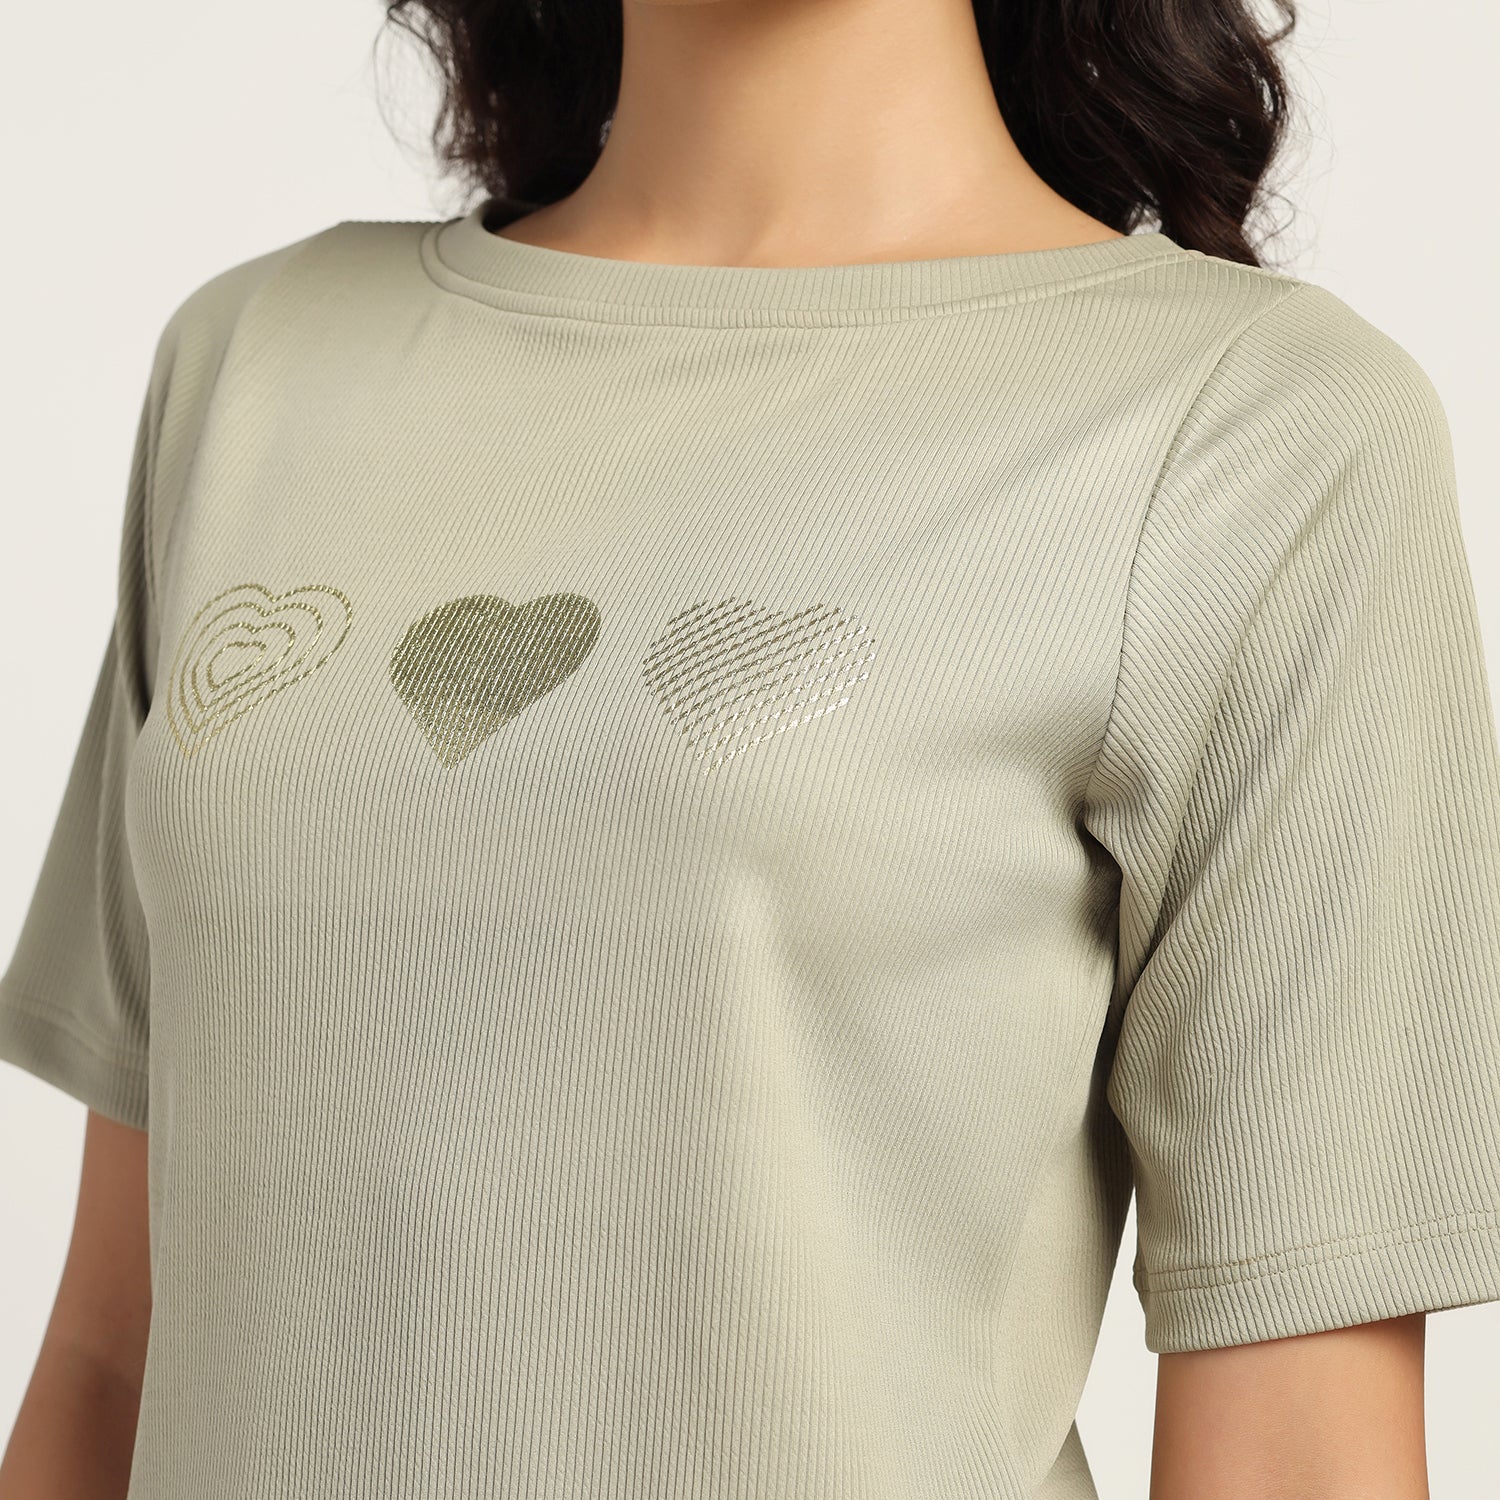 Green Heart Foil Printed Ribbed Top